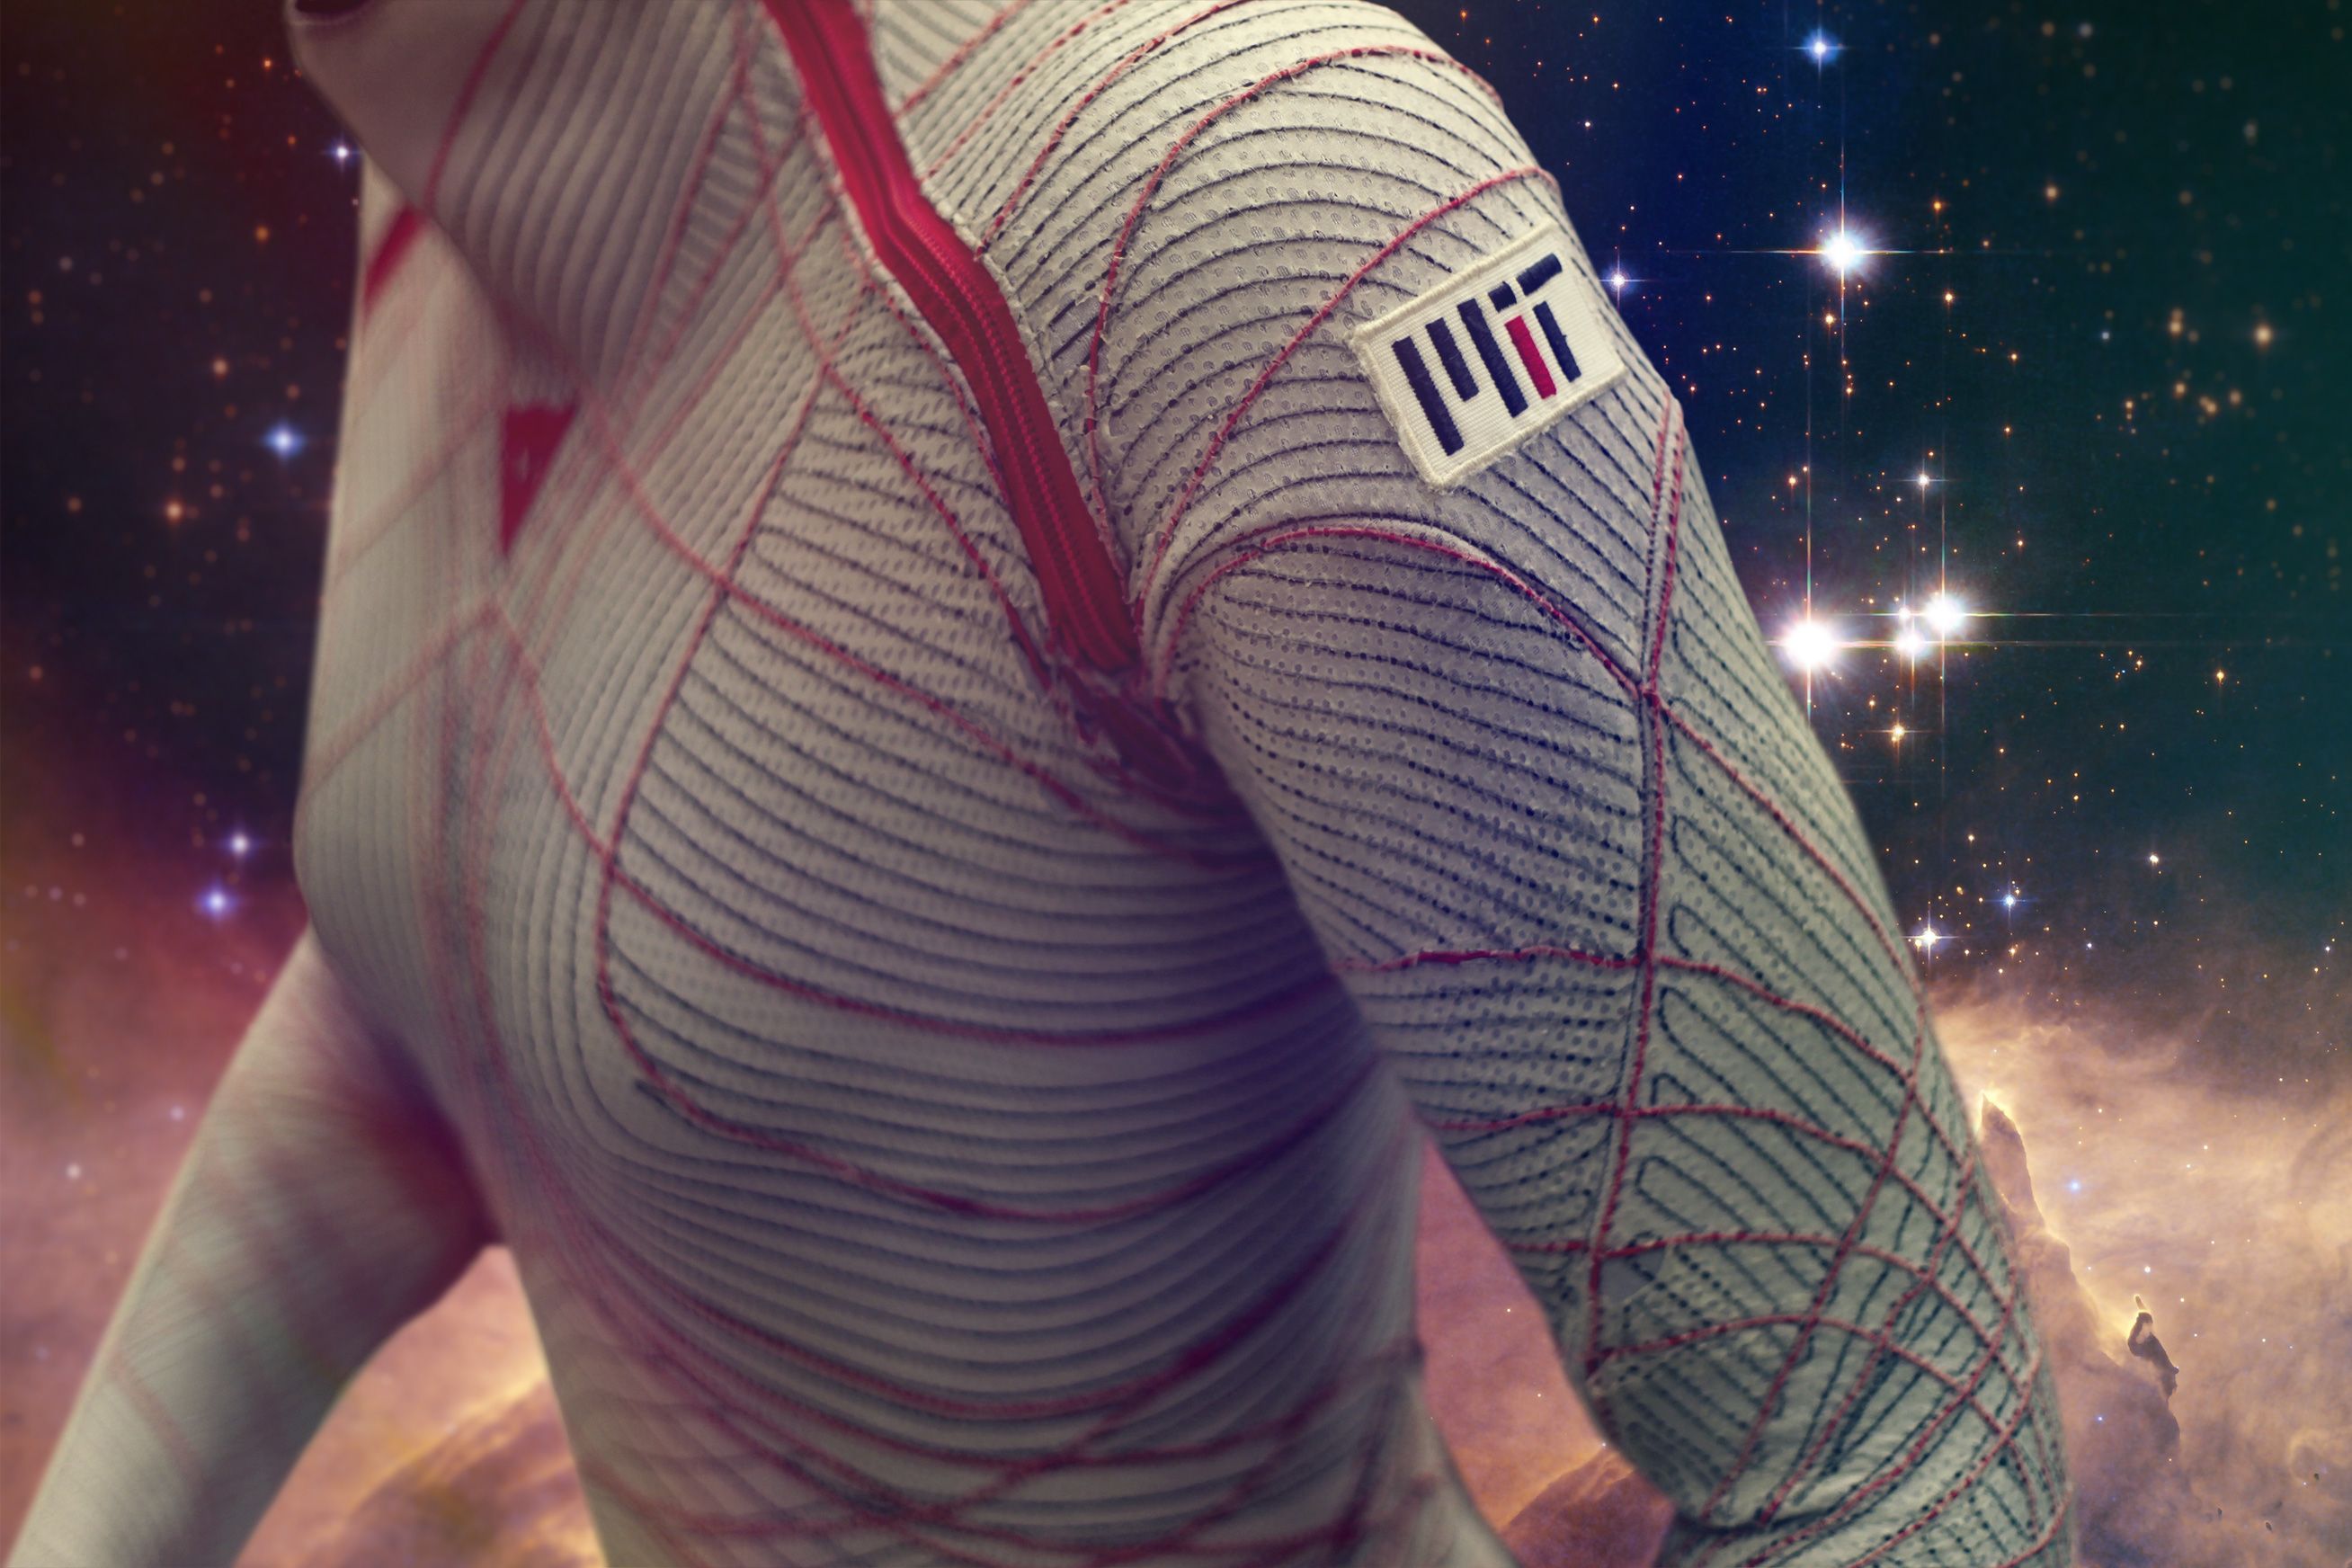 Shrink-wrapping spacesuits, MIT News